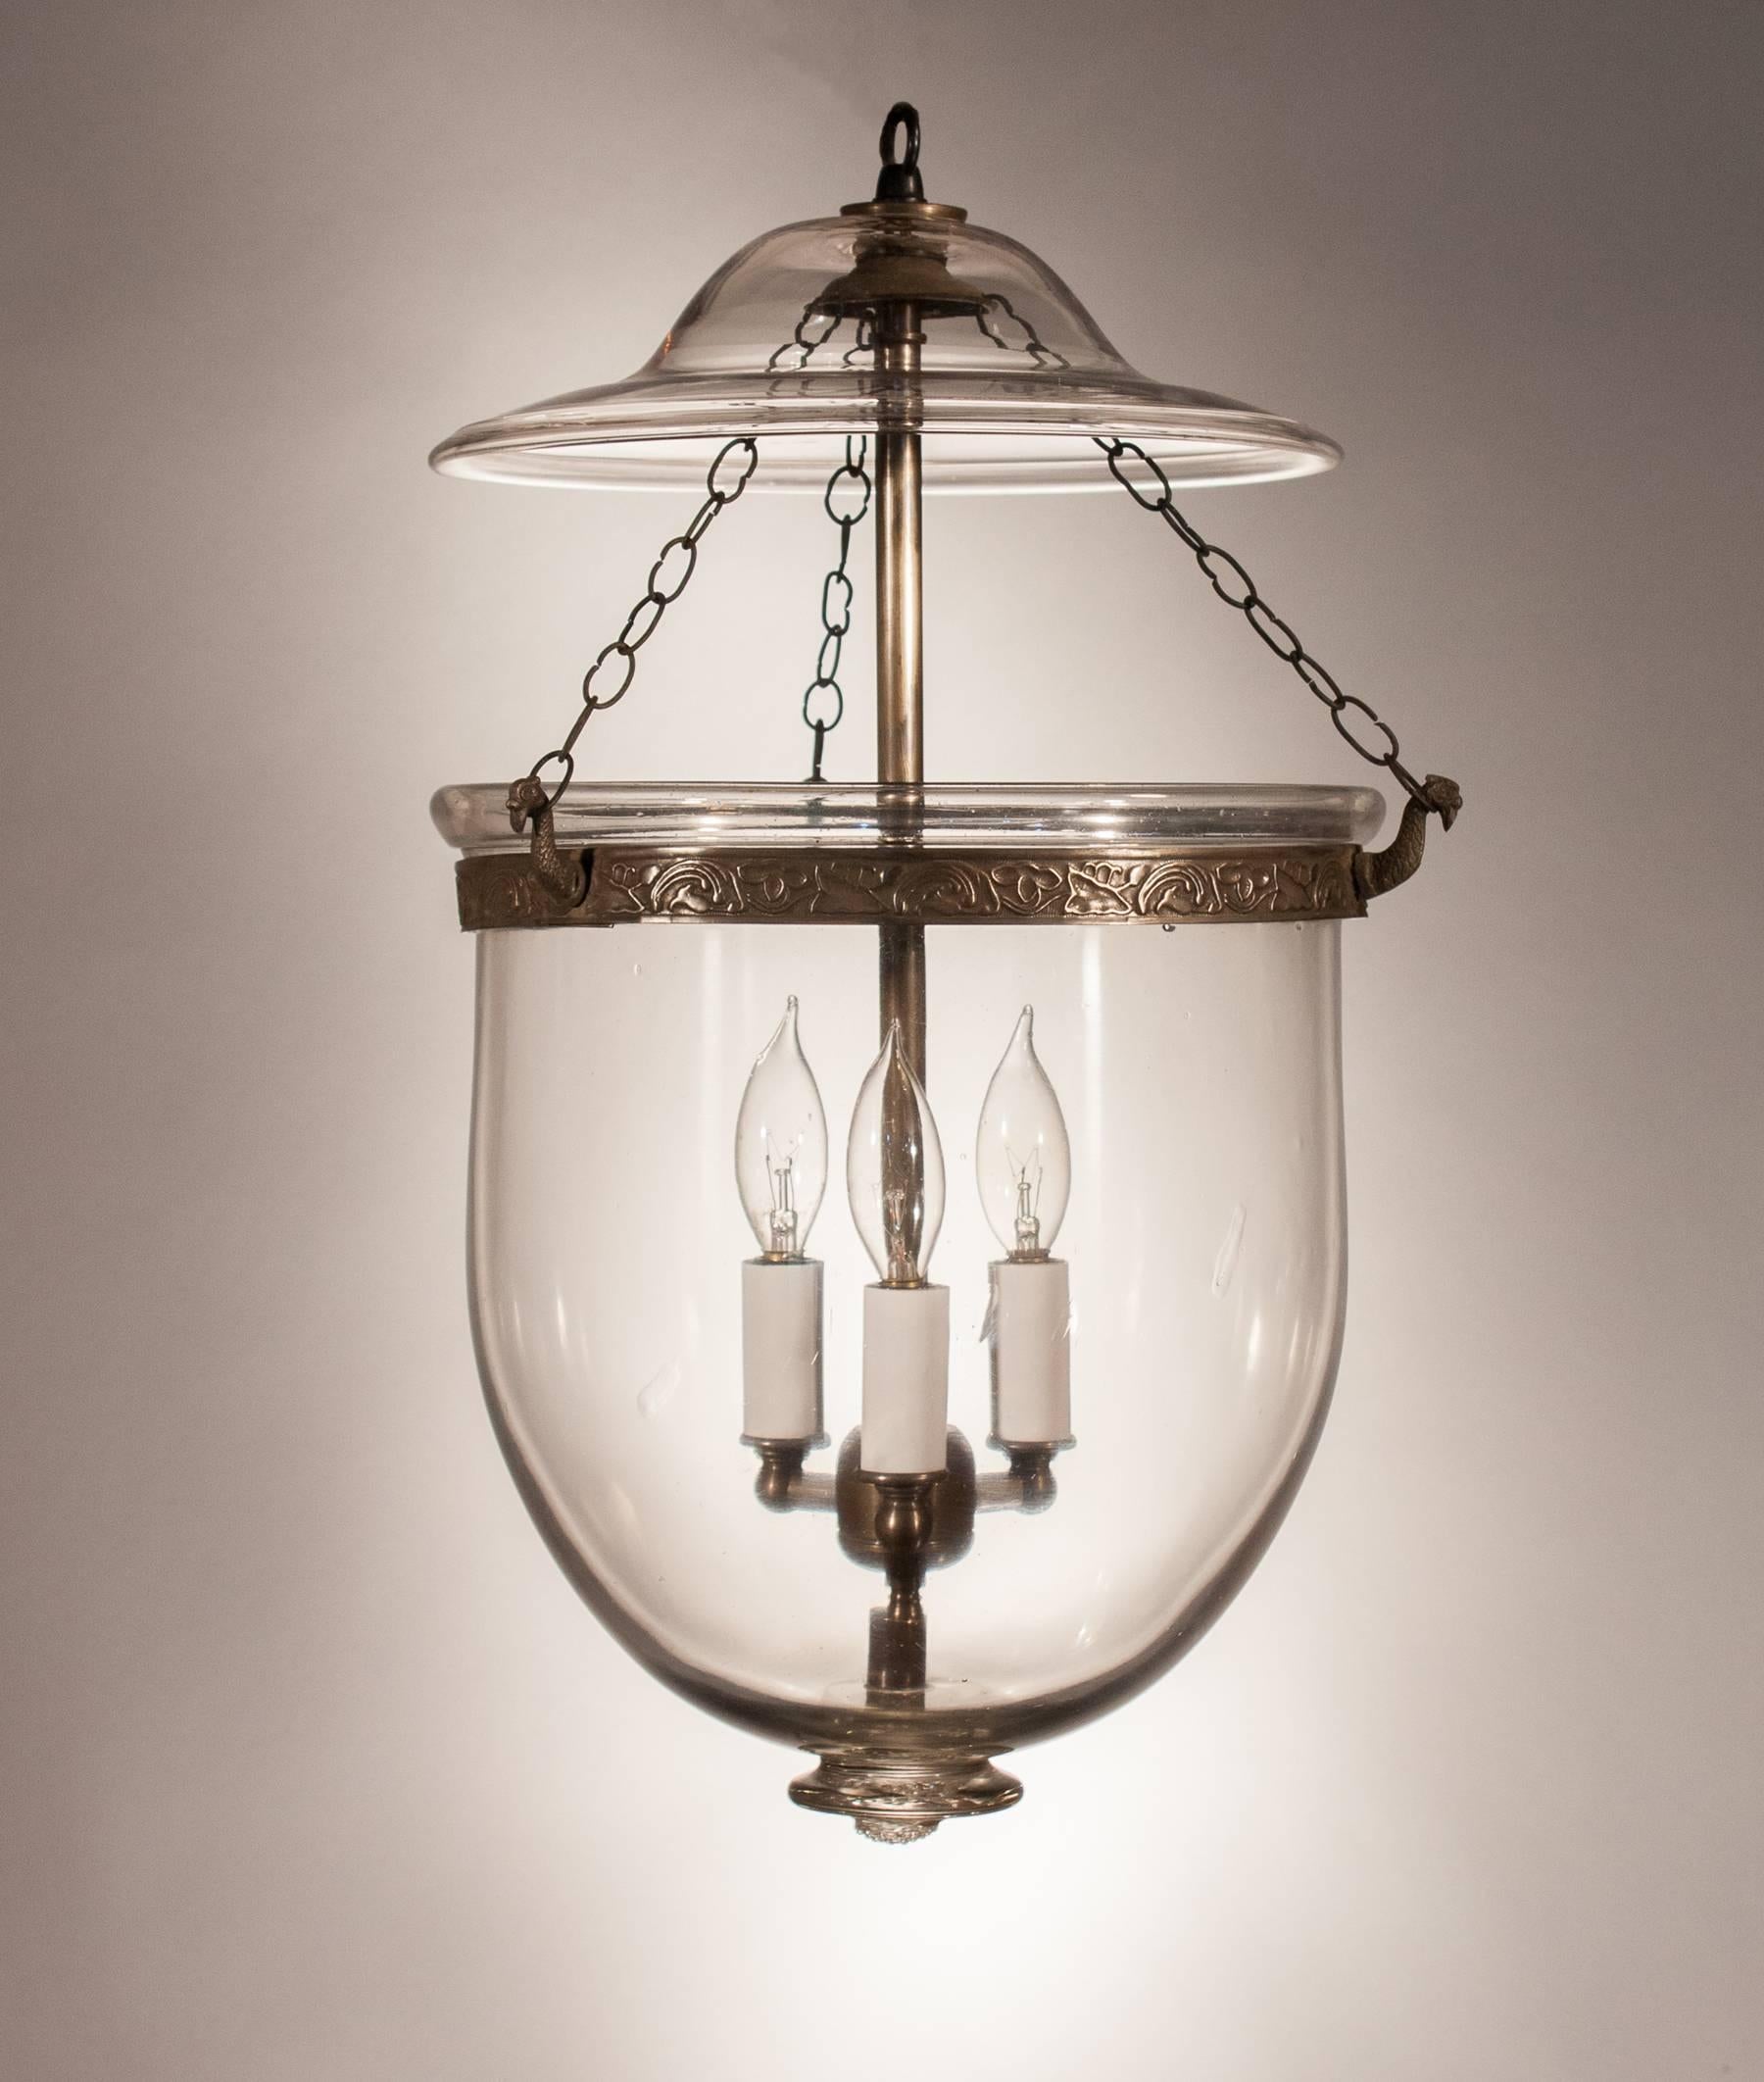 Classic handblown clear glass bell jar lantern from England, circa 1870. This shapely hall lantern has its original smoke bell at top and a well-proportioned glass pontil at bottom. The brass band, which has an embossed vine motif, has been replaced